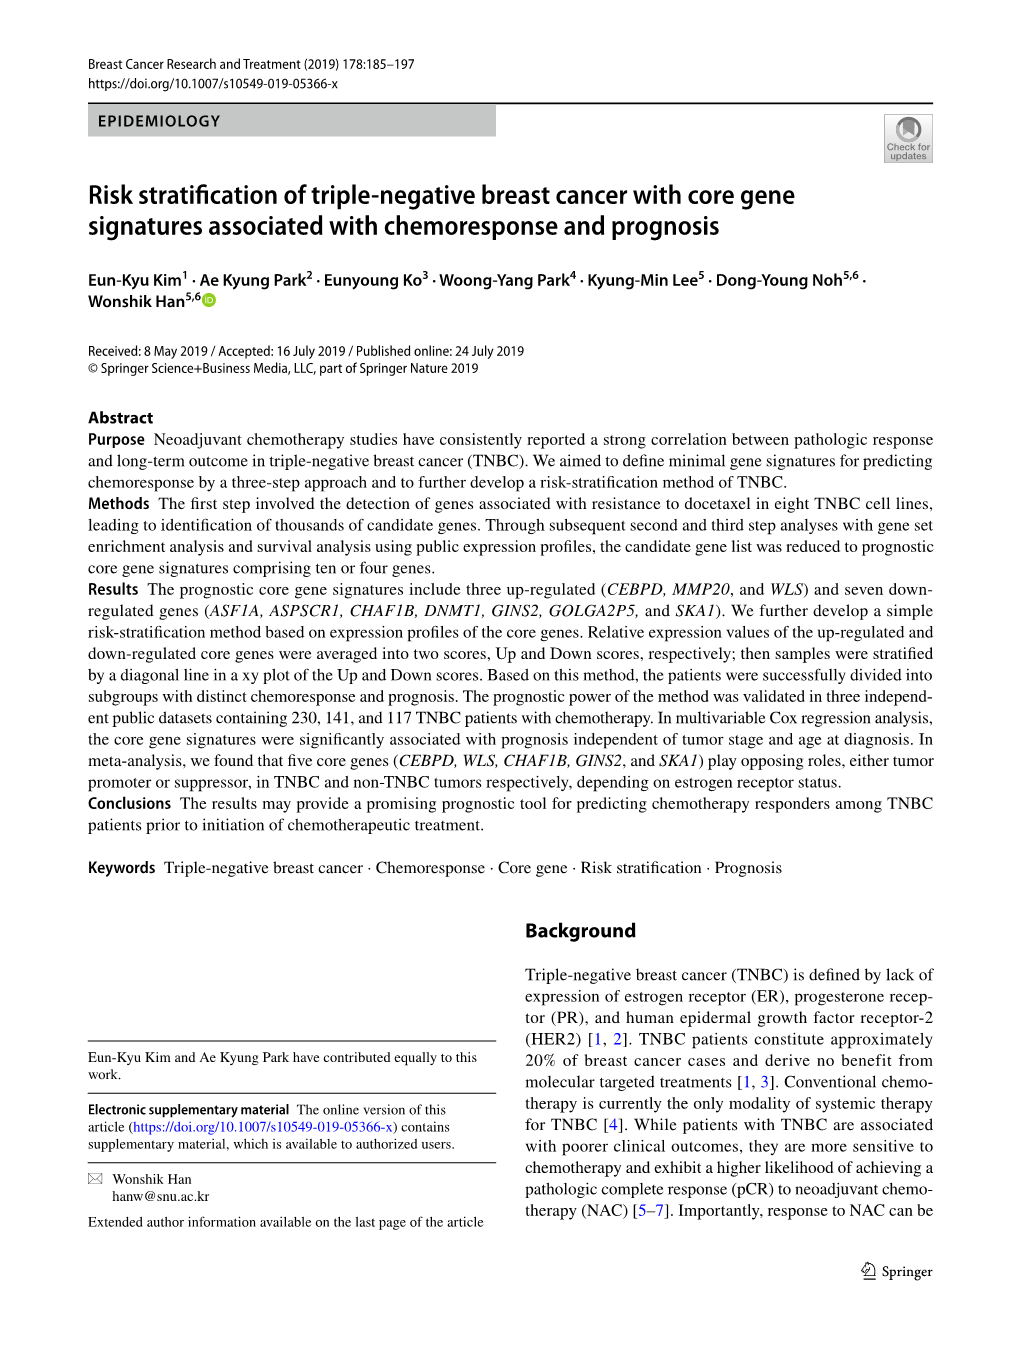 Risk Stratification of Triple-Negative Breast Cancer with Core Gene